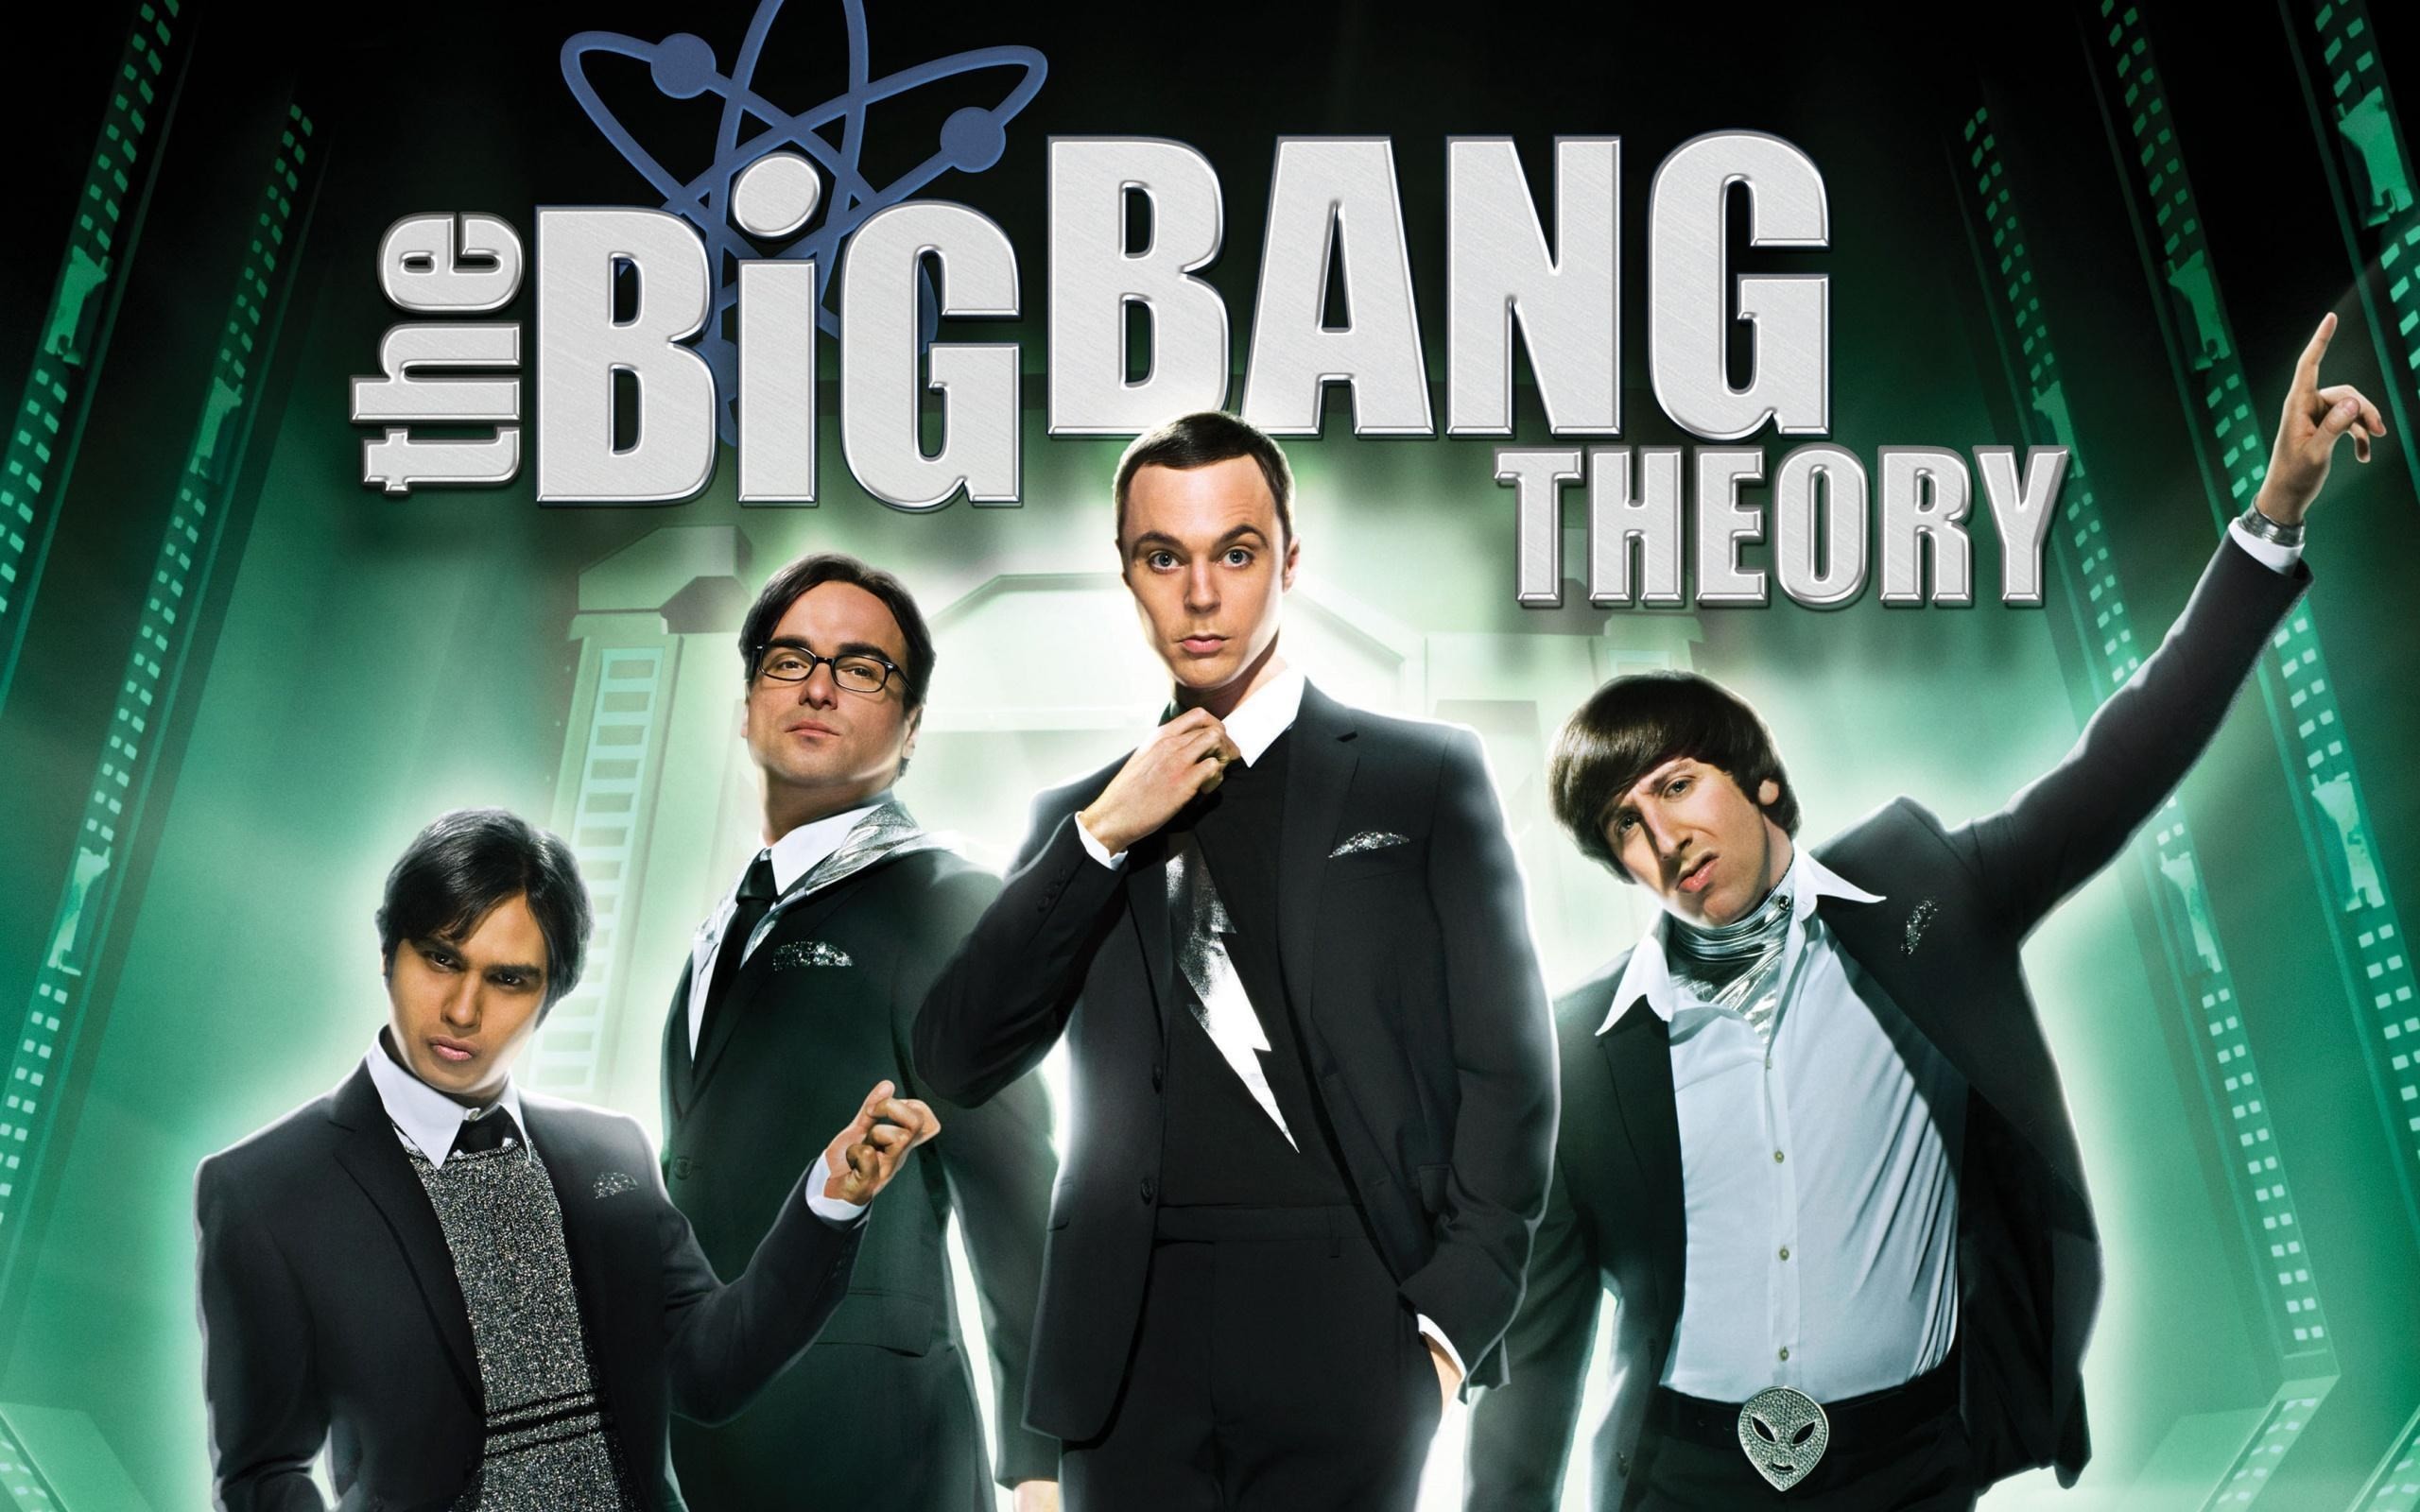 2560x1600 the big bang theory wallpaper: High Definition Backgrounds - the big bang  theory category